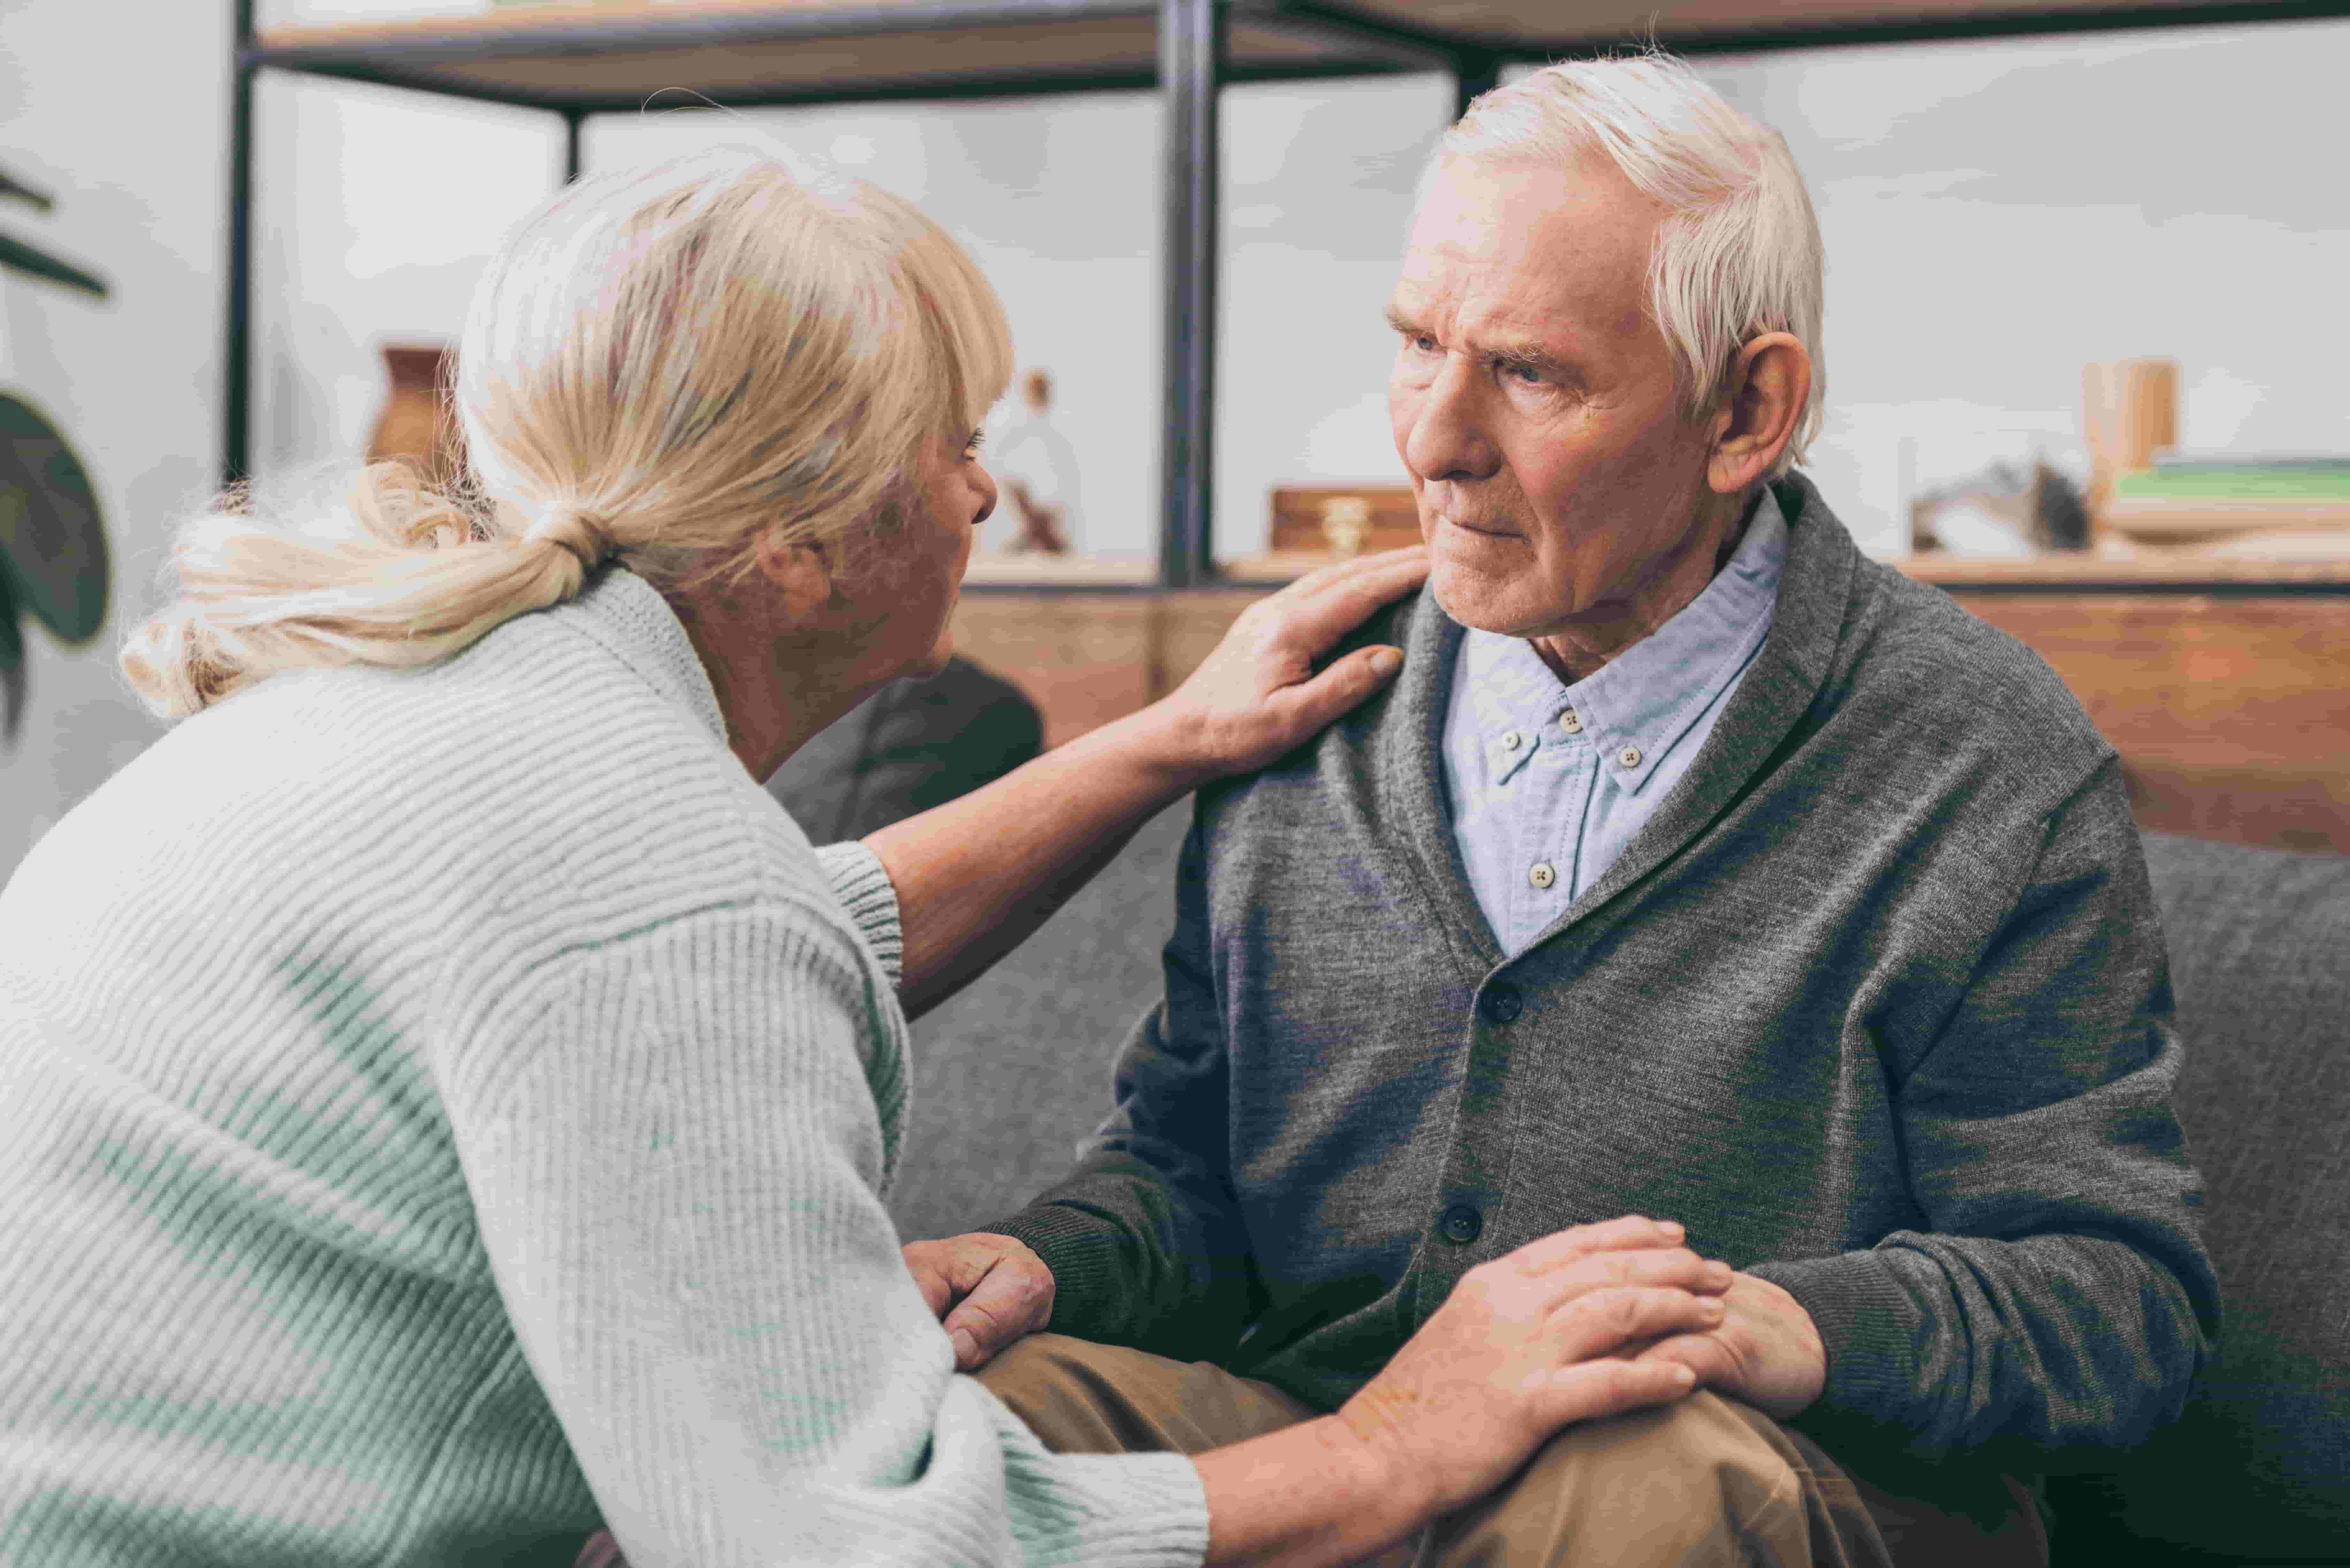 Older woman comforts older man with dementia